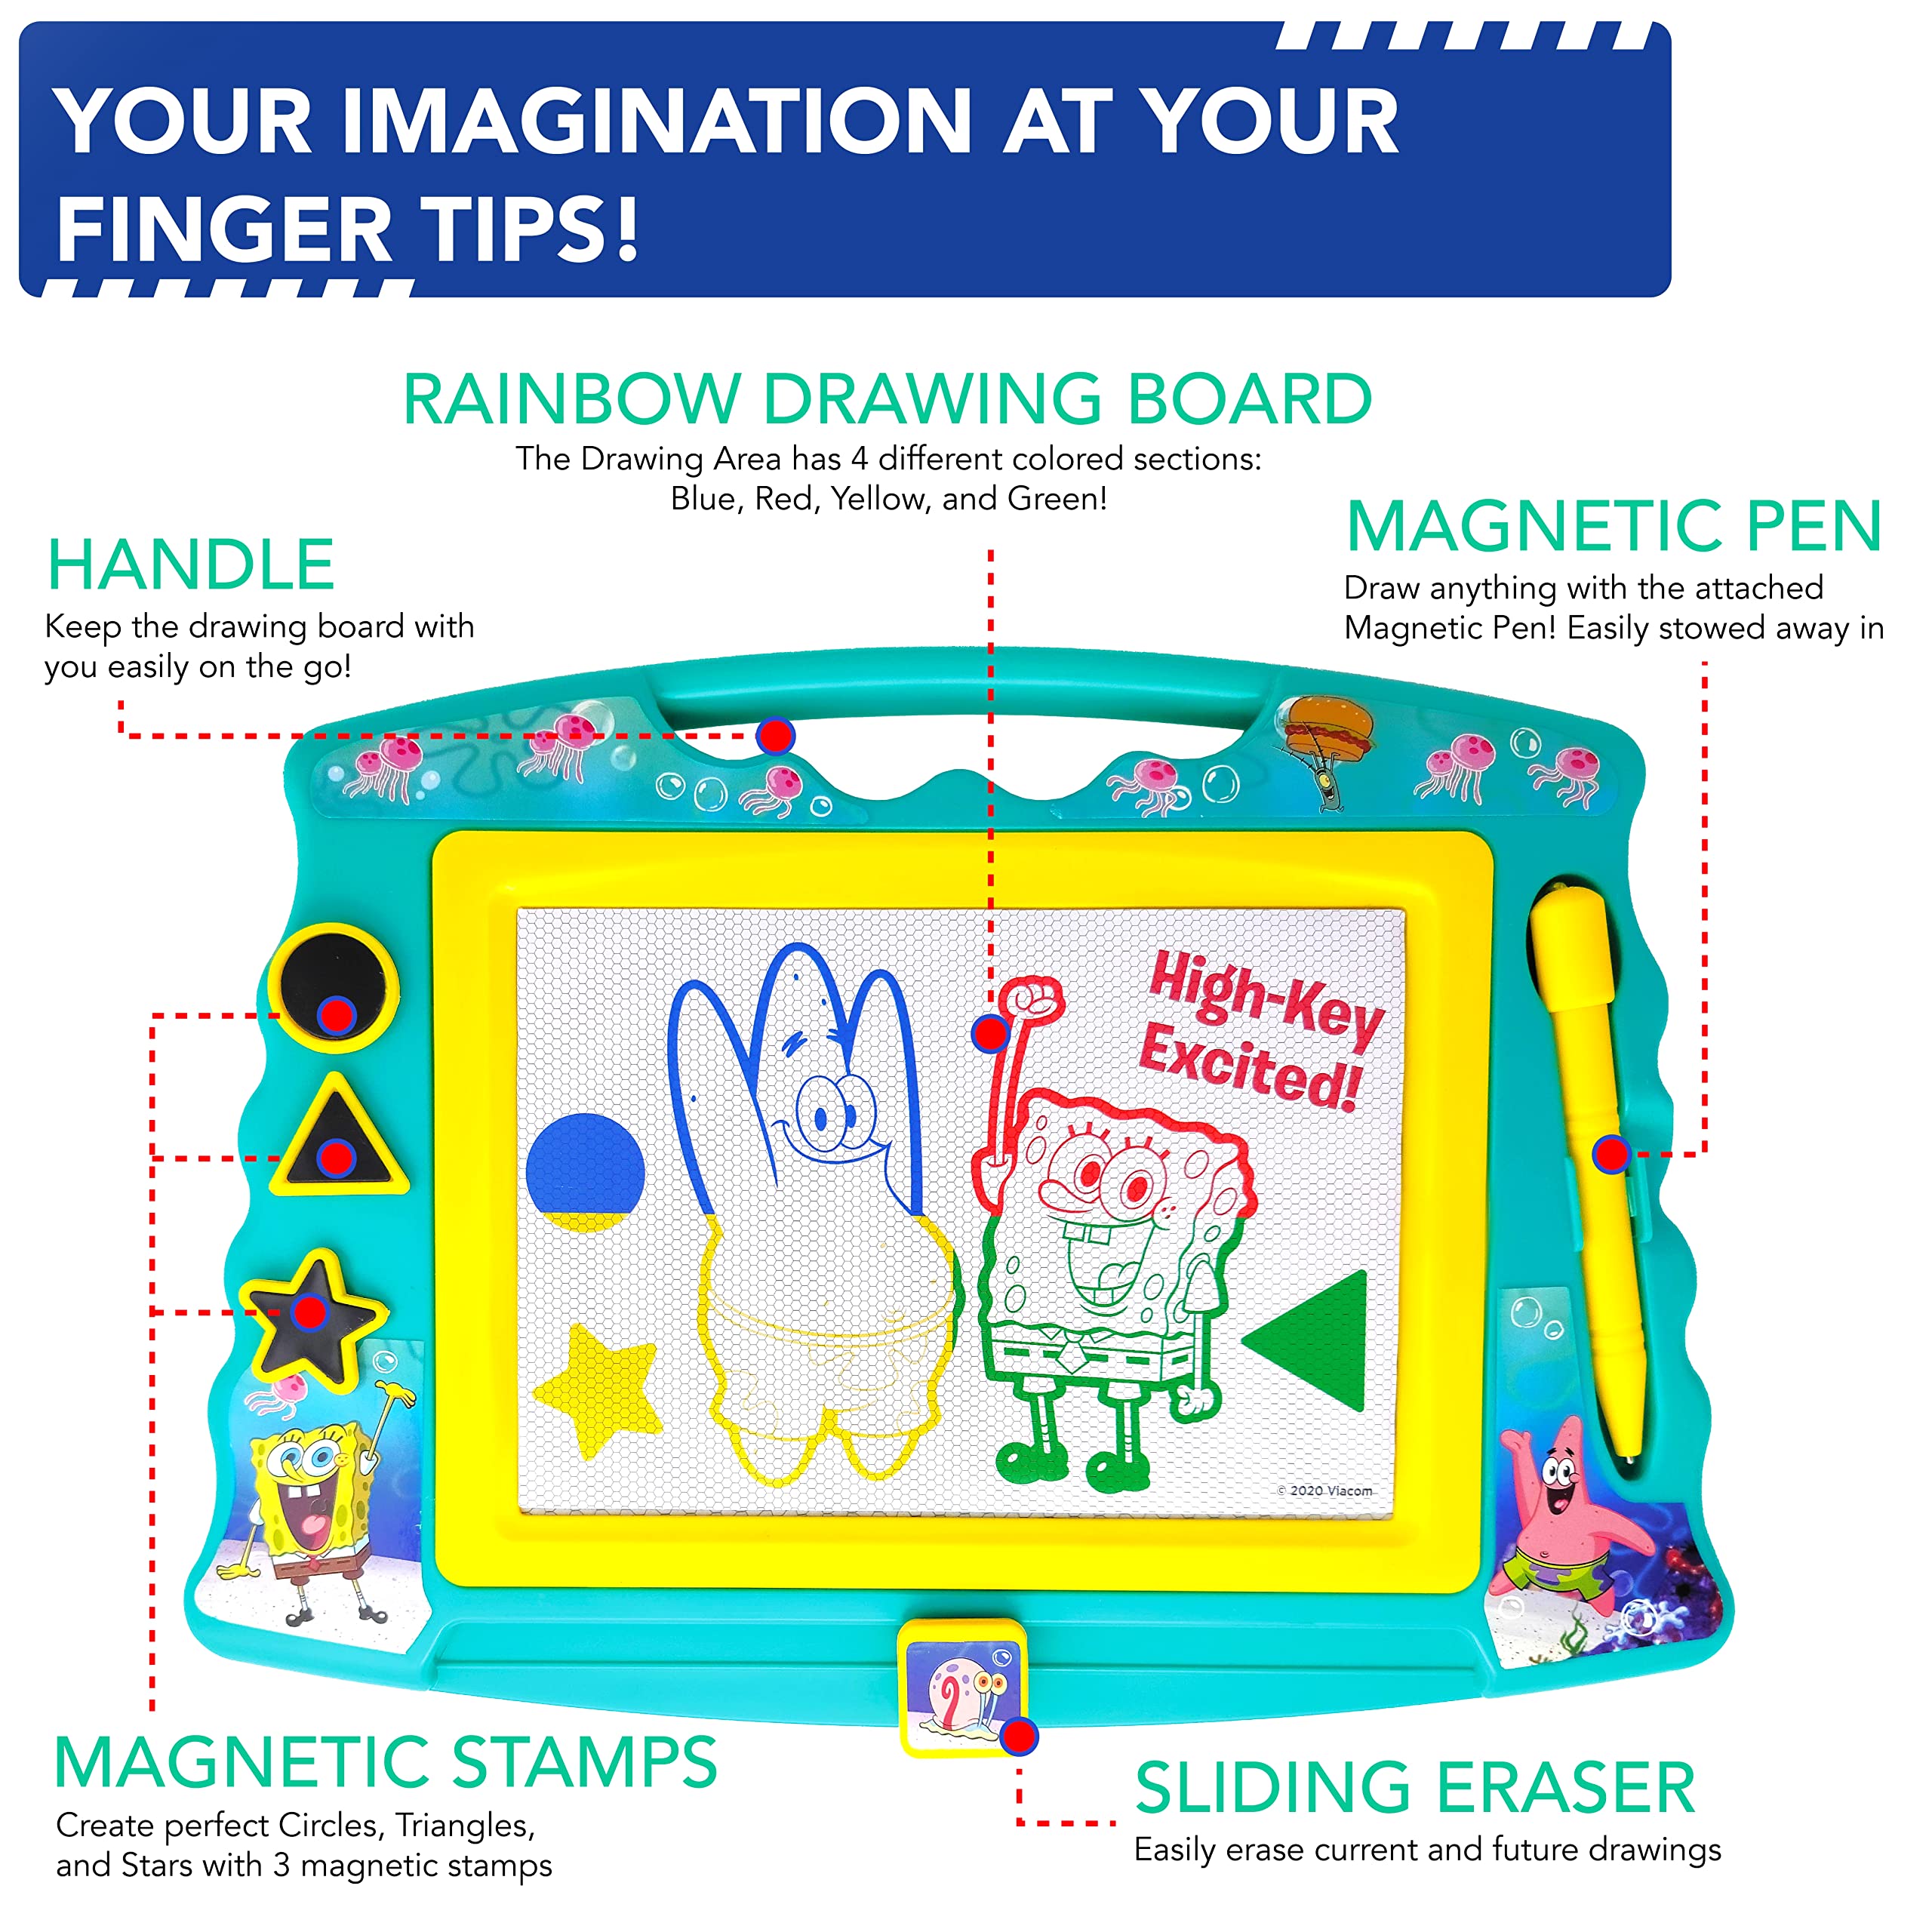 SpongeBob Squarepants Magnetic Drawing Board with Stylus and 3 Stamps, for Boys or Girls